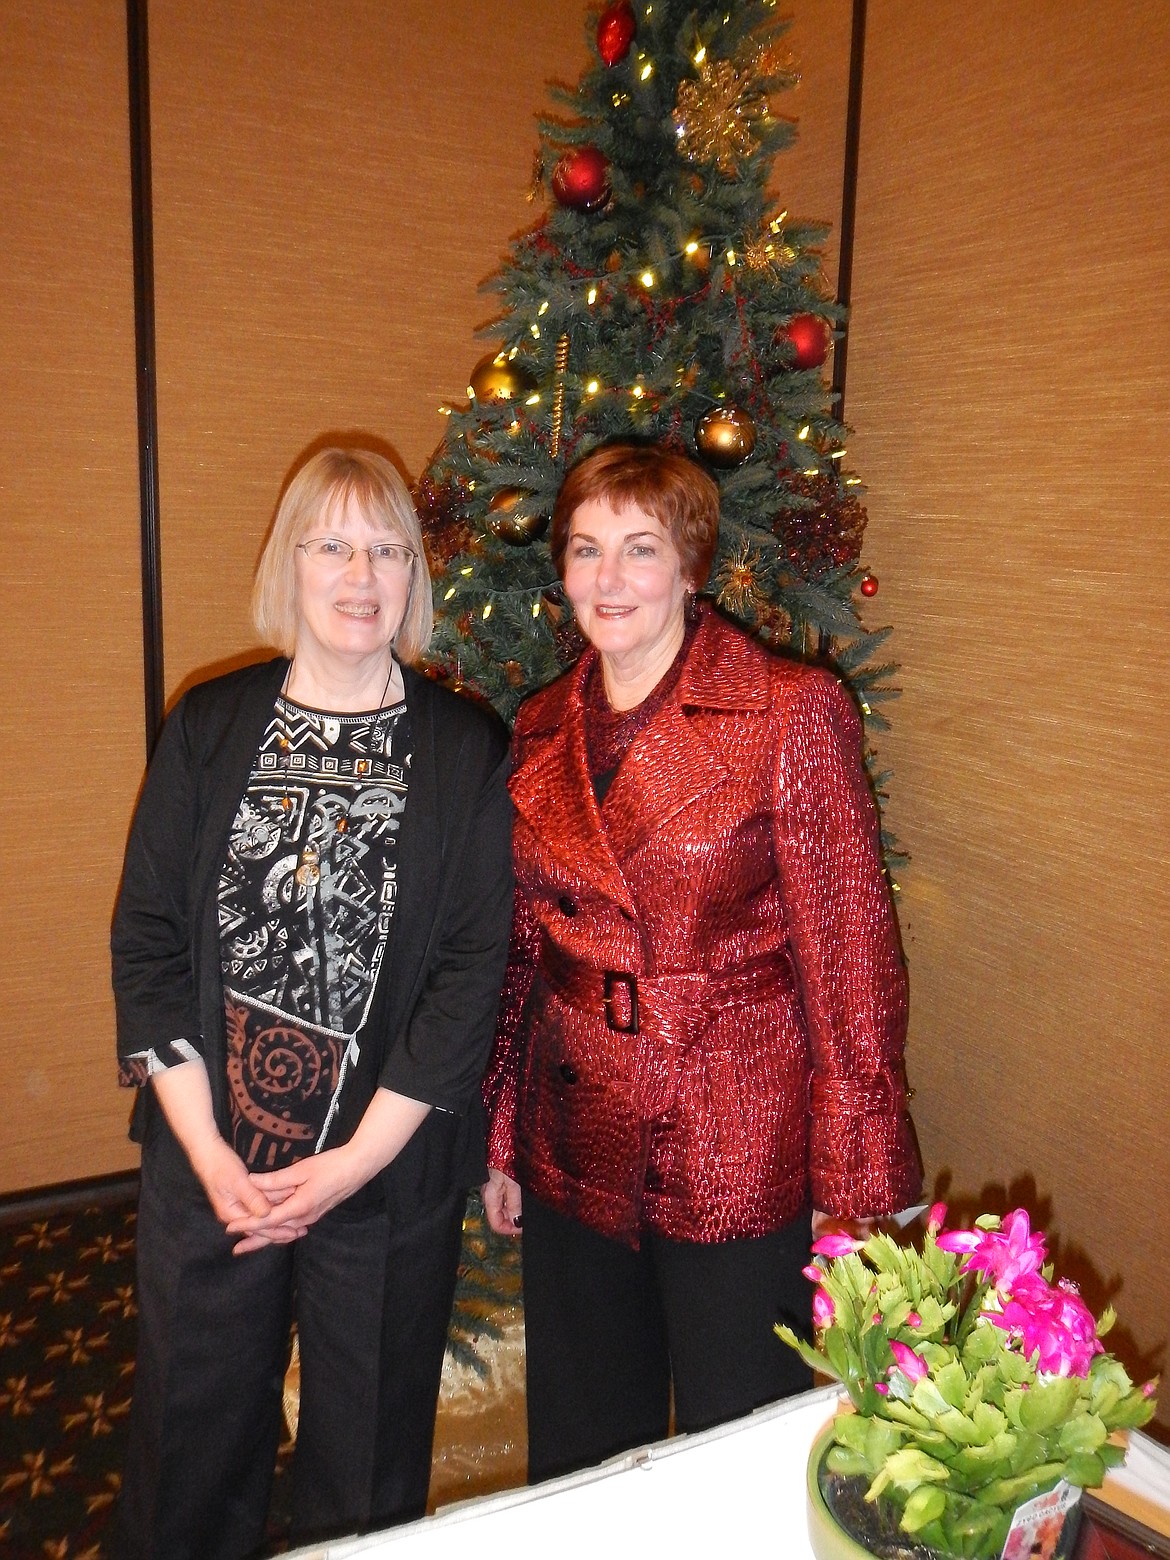 JUDY ROSENFELD-COX and Lynn Stanley are the 2016 recipients of the Flathead County Democratic Women of the Year award. It is unprecedented to award to two women, however, the organization felt that both are highly deserving of the honor.